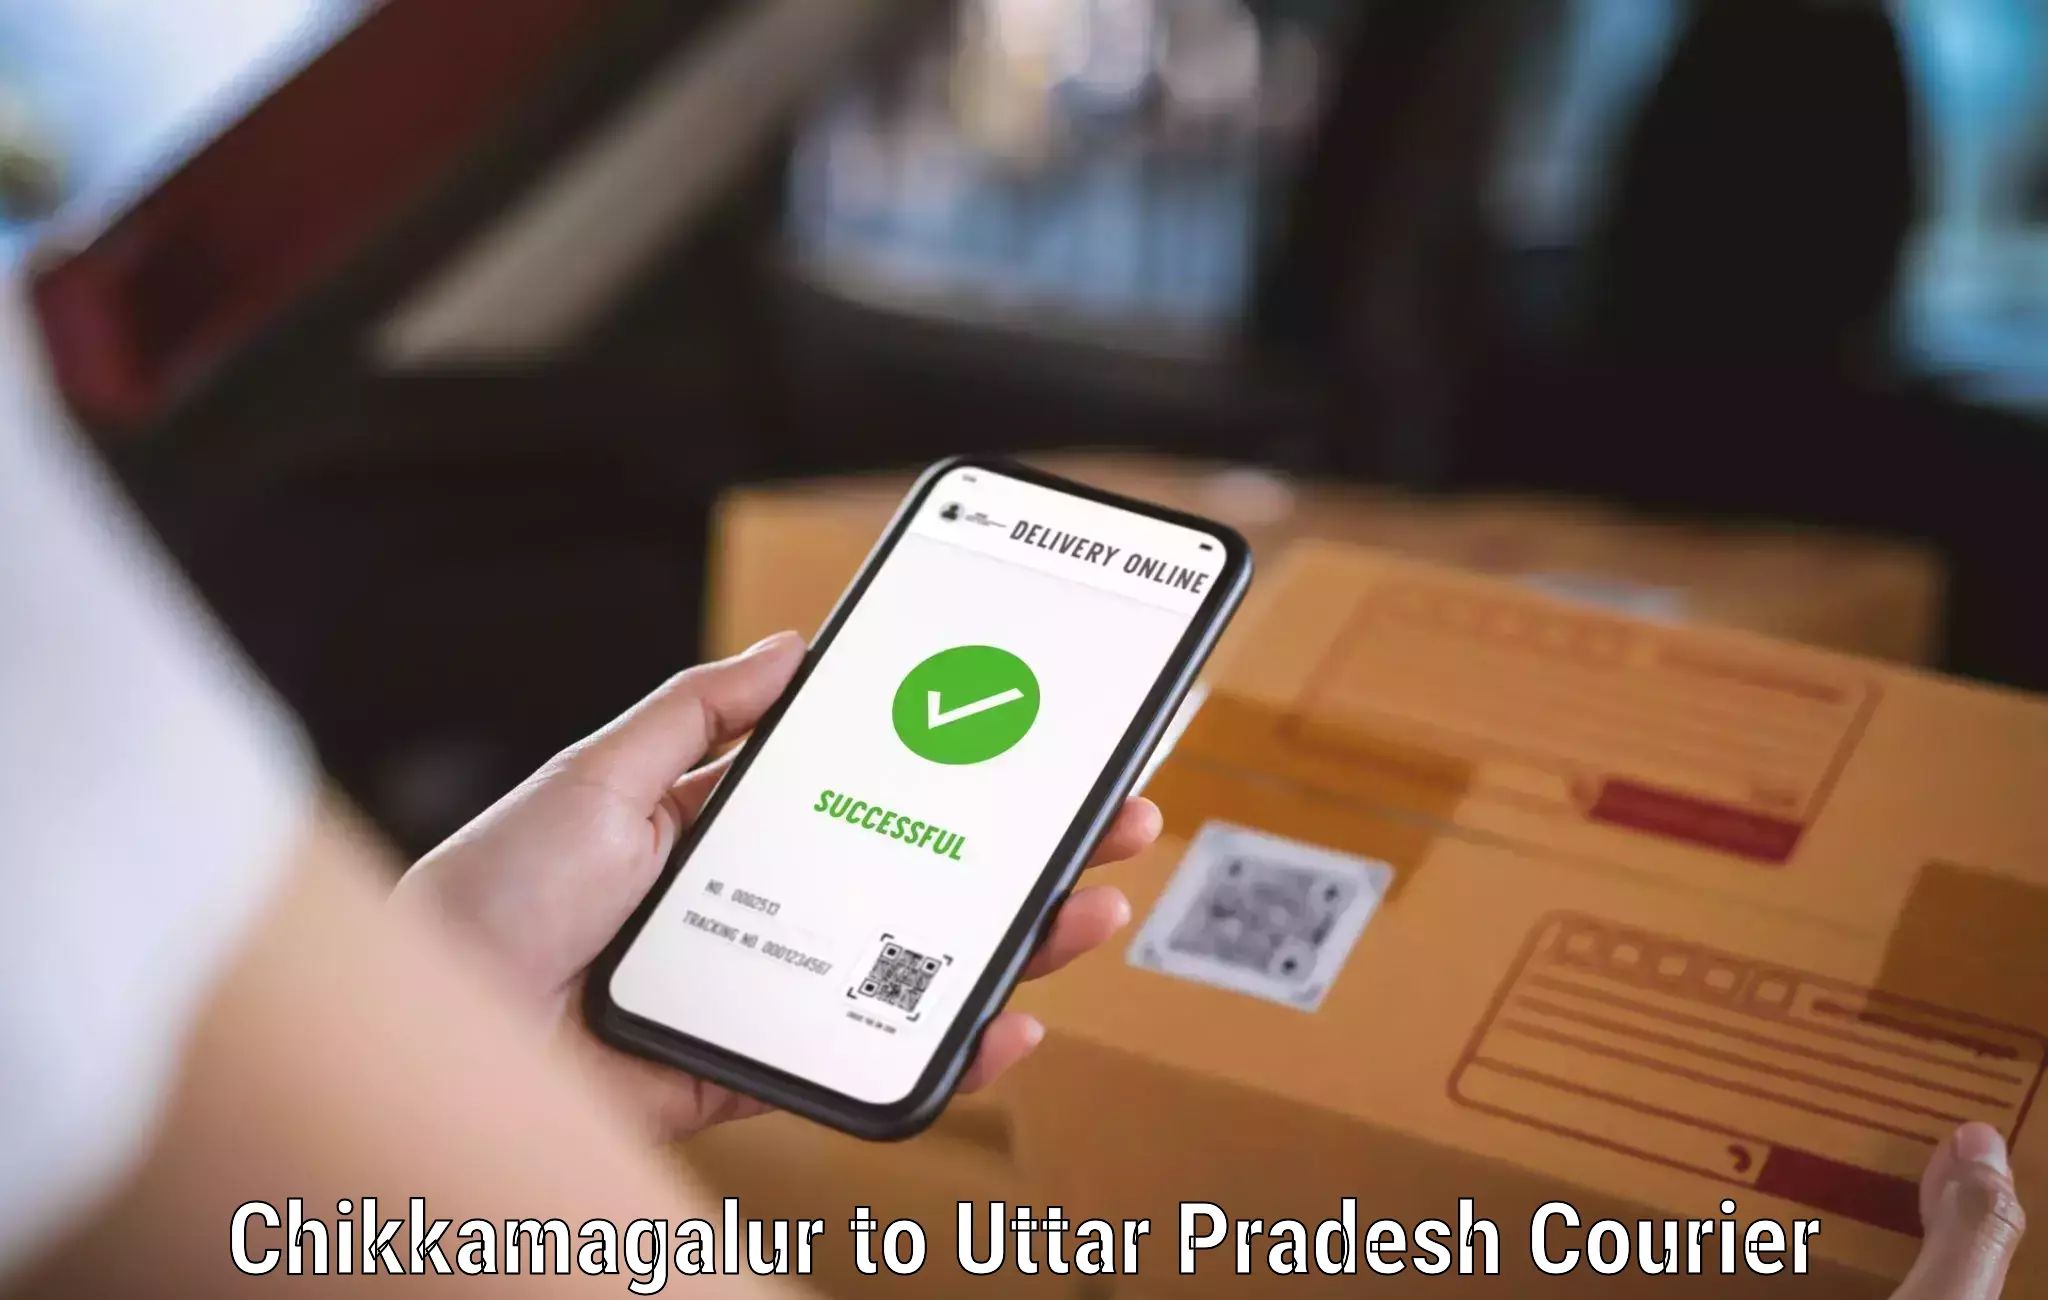 User-friendly delivery service Chikkamagalur to Nighasan